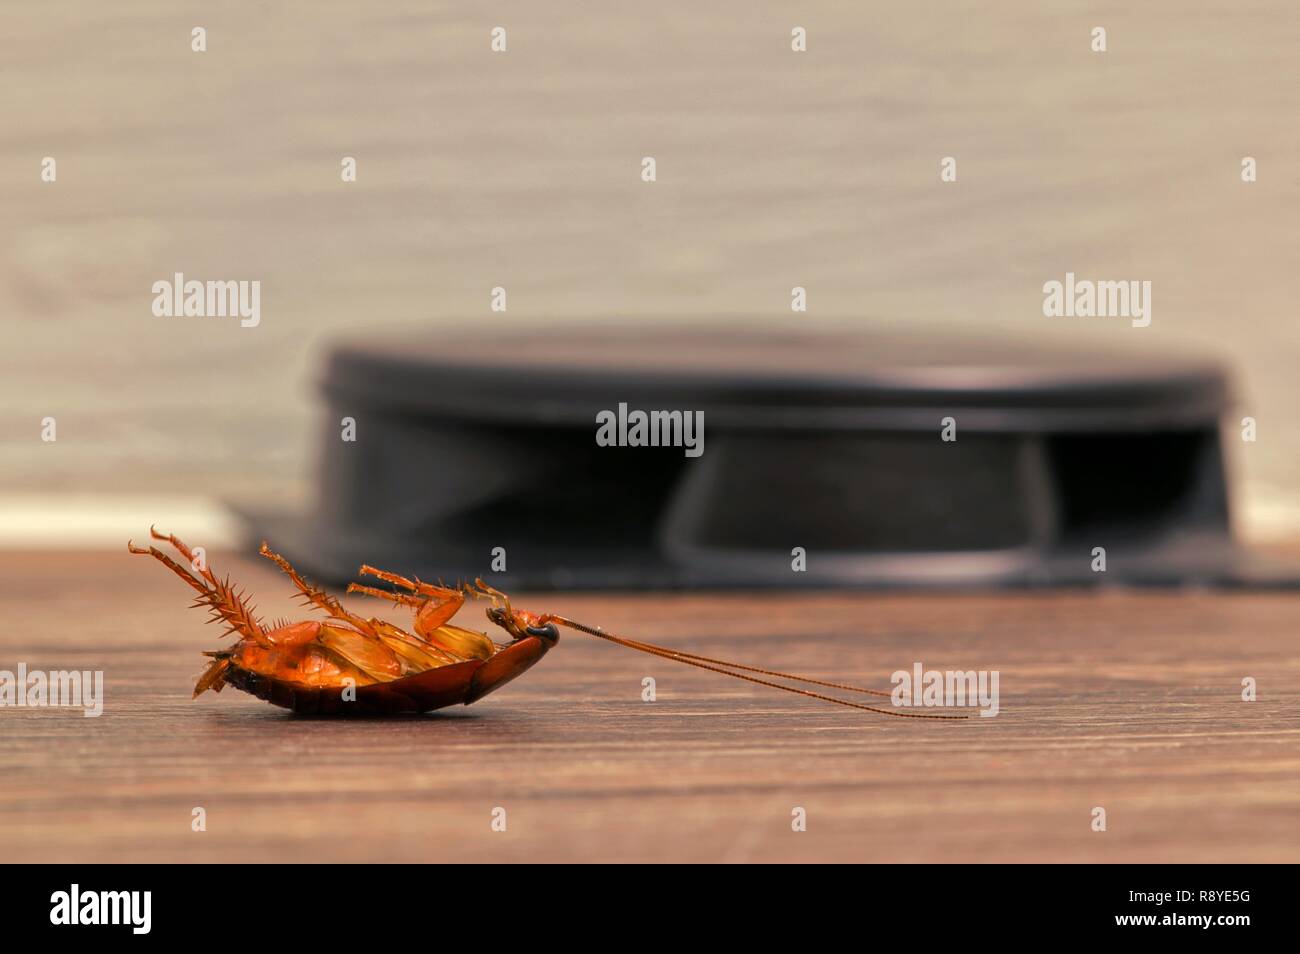 A dead cockroach laying on its back in the foreground, in front of a cockroach bait trap by a skirting board. Stock Photo